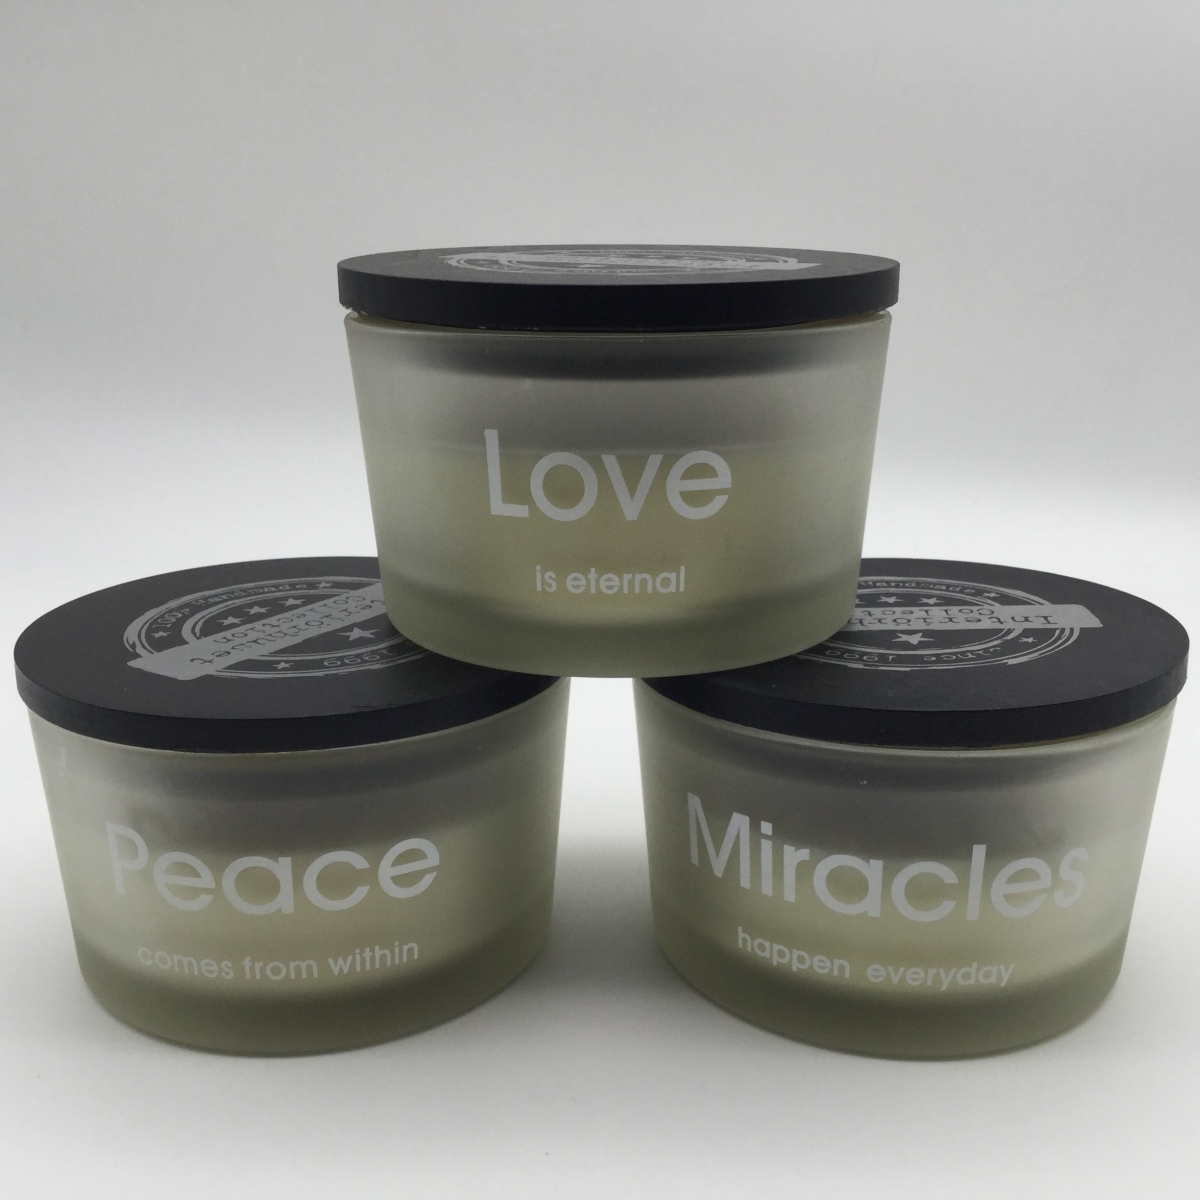 Scented Candles – Matte White Candle Jar ,Wood Lid ,Miracles, Peace ,Love ,China Factory Price-HOWCANDLE-Candles,Scented Candles,Aromatherapy Candles,Soy Candles,Vegan Candles,Jar Candles,Pillar Candles,Candle Gift Sets,Essential Oils,Reed Diffuser,Candle Holder,